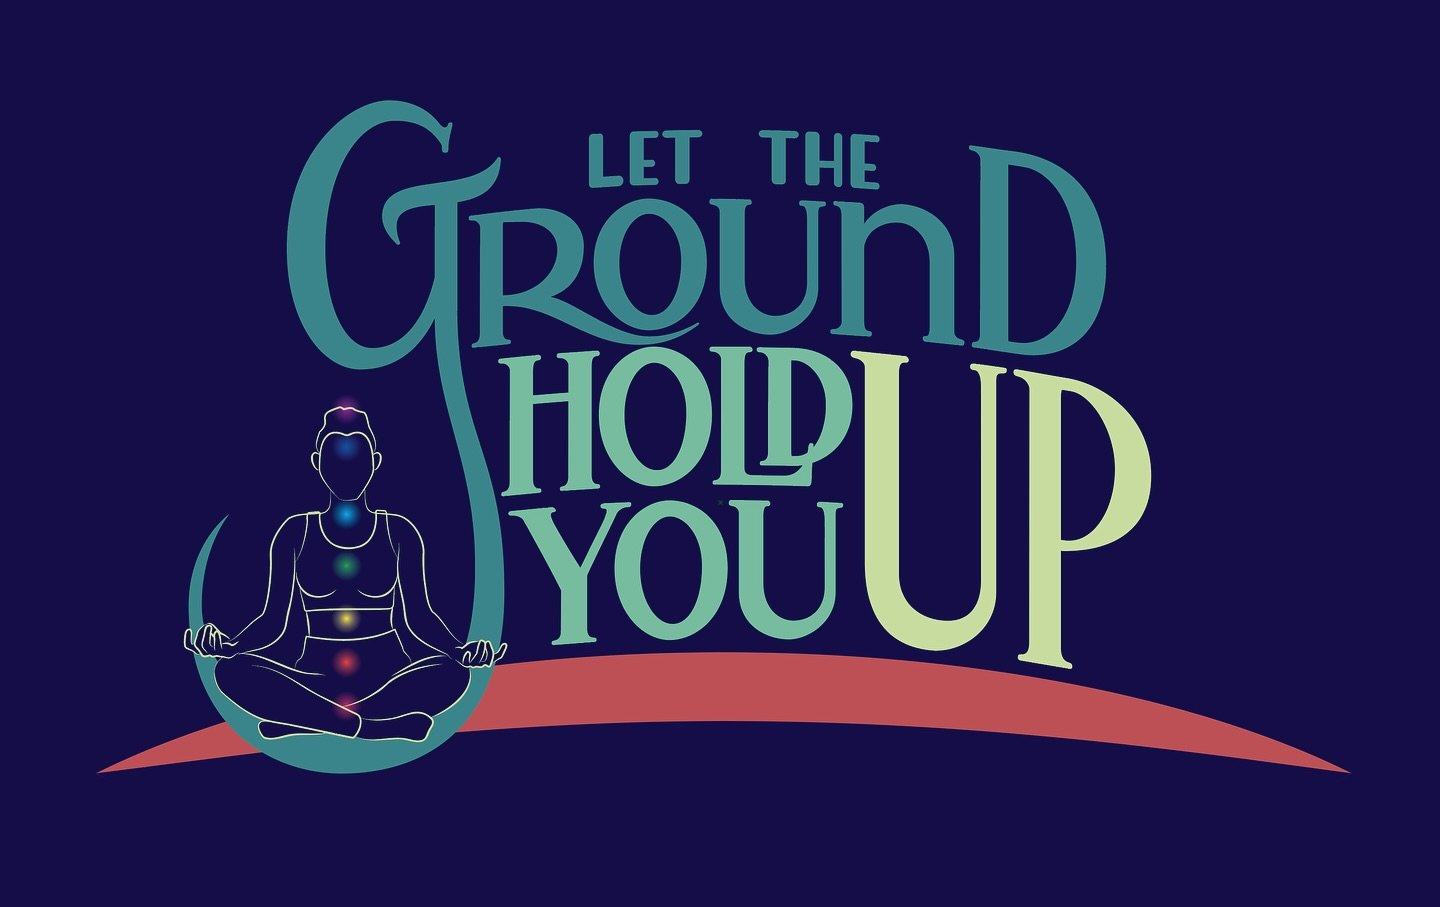 Let the Ground Hold You Up. 
I heard this phrase at the end of a yoga session during savasana. It&rsquo;s when you just relax into your body and release any remaining tension and the instructor said, let the ground hold you up. 

It just resonated wi